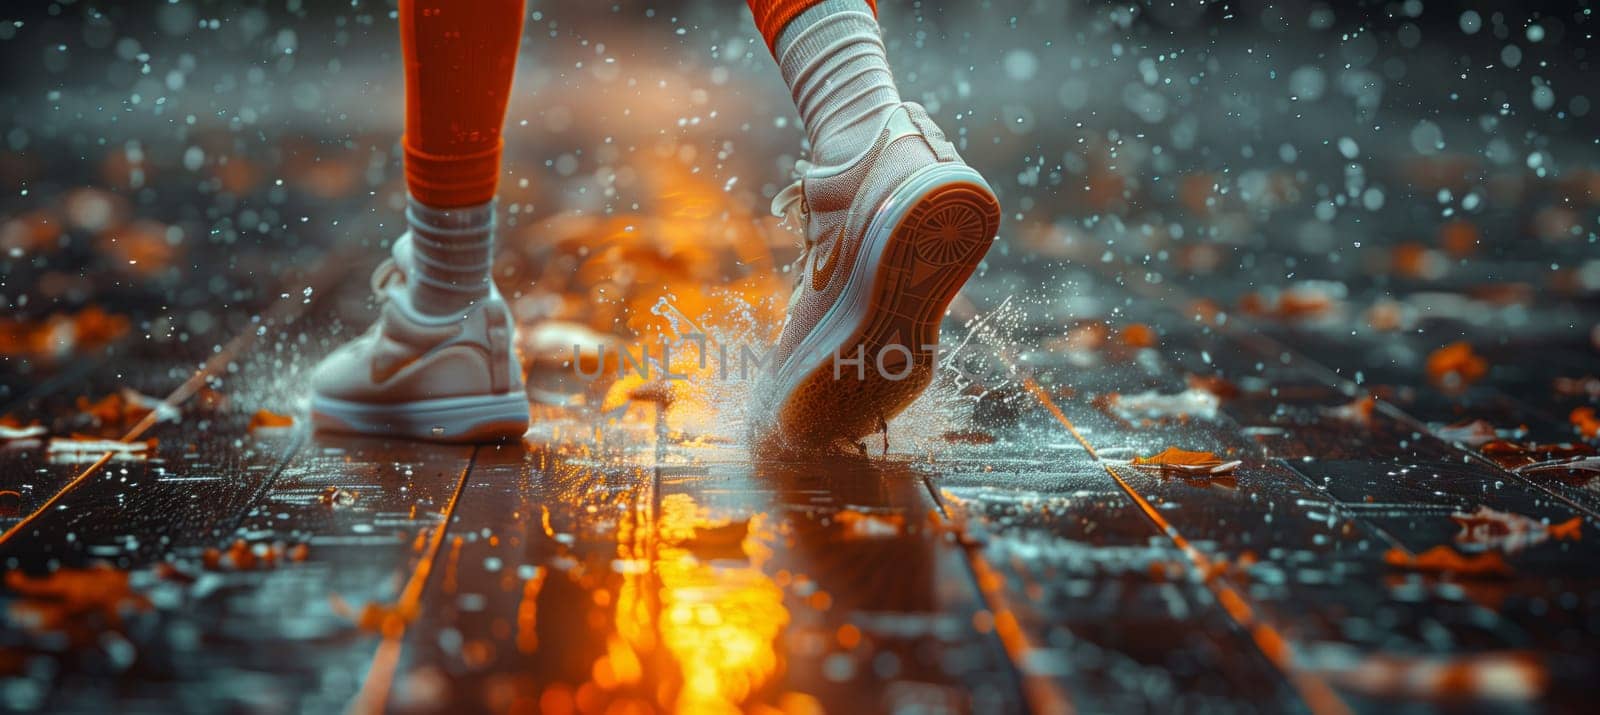 A persons warm human leg sinks into the puddle of polluted water, sending smoke rising from the heat reacting with the asphalt beneath their foot